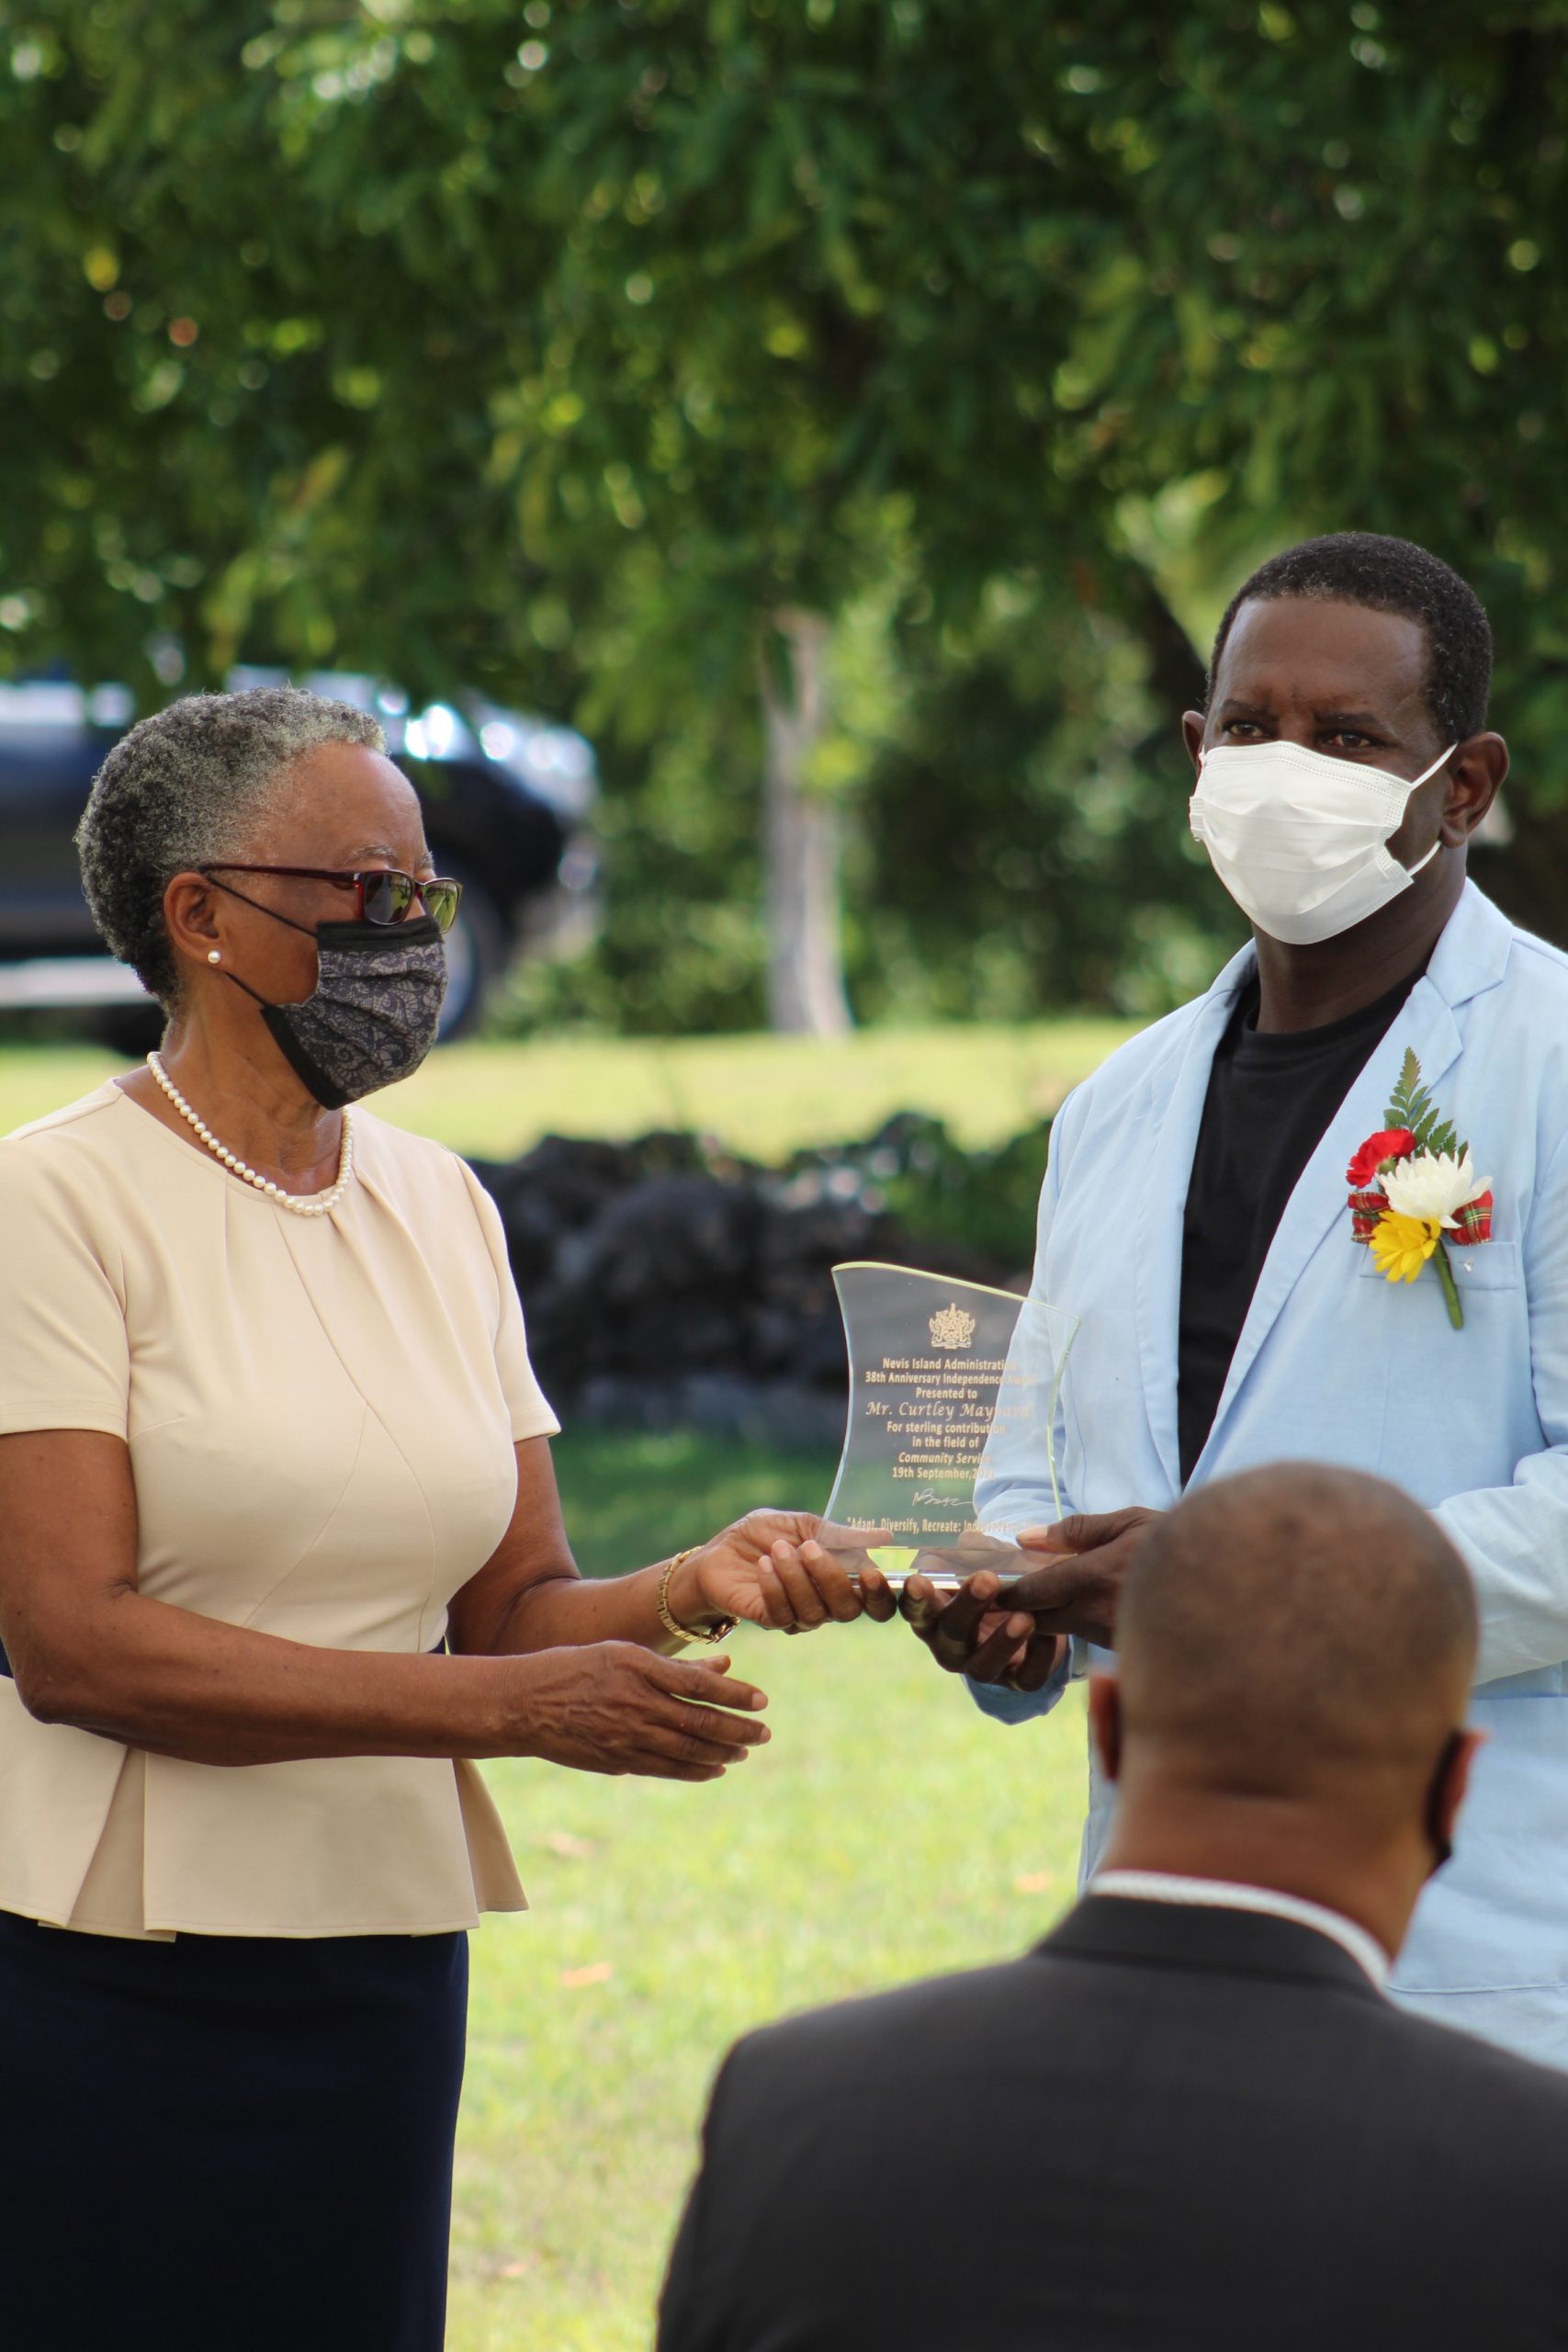 Mr. Curtley Maynard of Gingerland receiving a plaque from Her Honour Mrs Hyleeta Liburd for his contribution to the development of Music at an Awards Ceremony on September 20, 2021, at an Awards Ceremony at Government House on the occasion of the 38th Anniversary of Independence of St. Christopher and Nevis